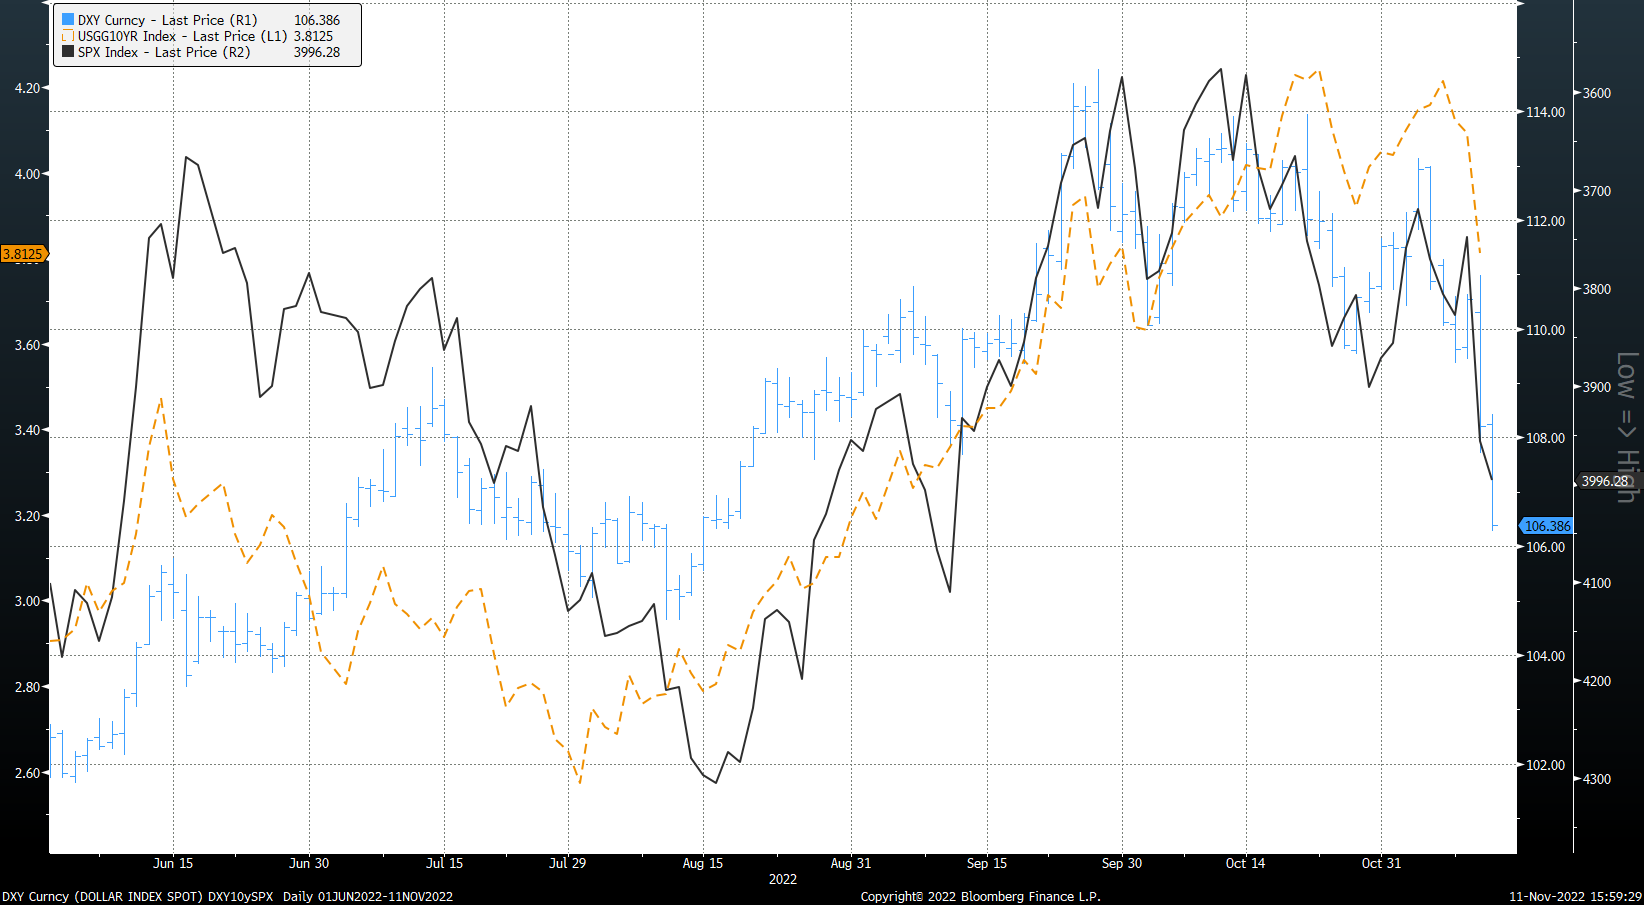 DXY Index vs US 10 year yield and SPX Index (inverted)